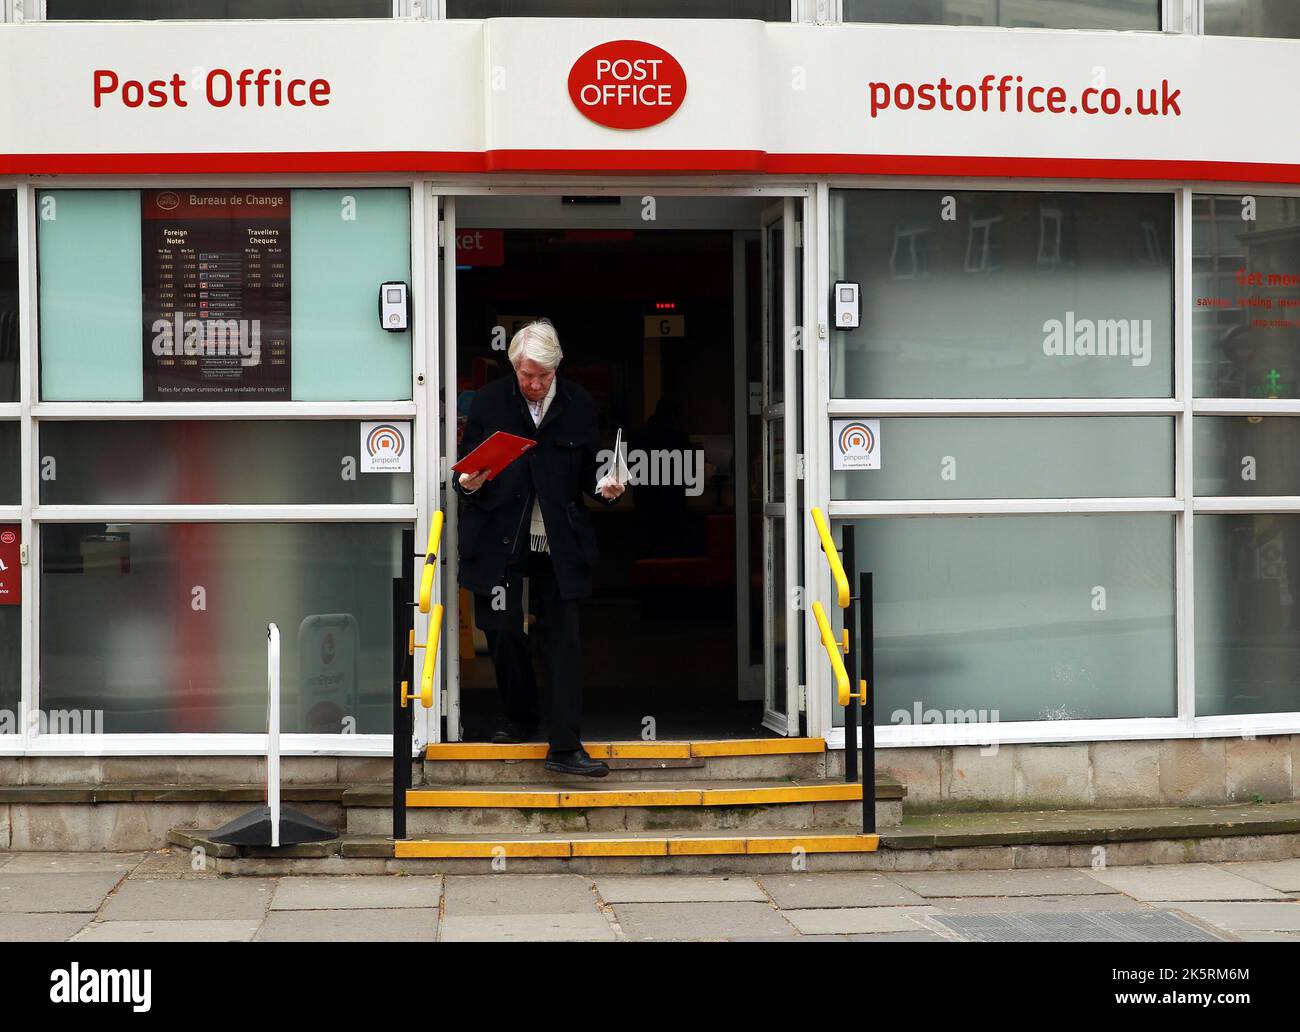 File photo dated 17/02/14 of a Post Office in Victoria, London. Post Offices handled a record £3.45 billion in cash in August. Personal cash withdrawals in August totalled £805 million during the month, up 0.5% compared to July. Personal cash deposits exceeded £1.4 billion for the first time and business cash deposits were up 5.5% on July, reaching nearly £1.2 billion.Issue date: Monday October 10, 2022. Stock Photo